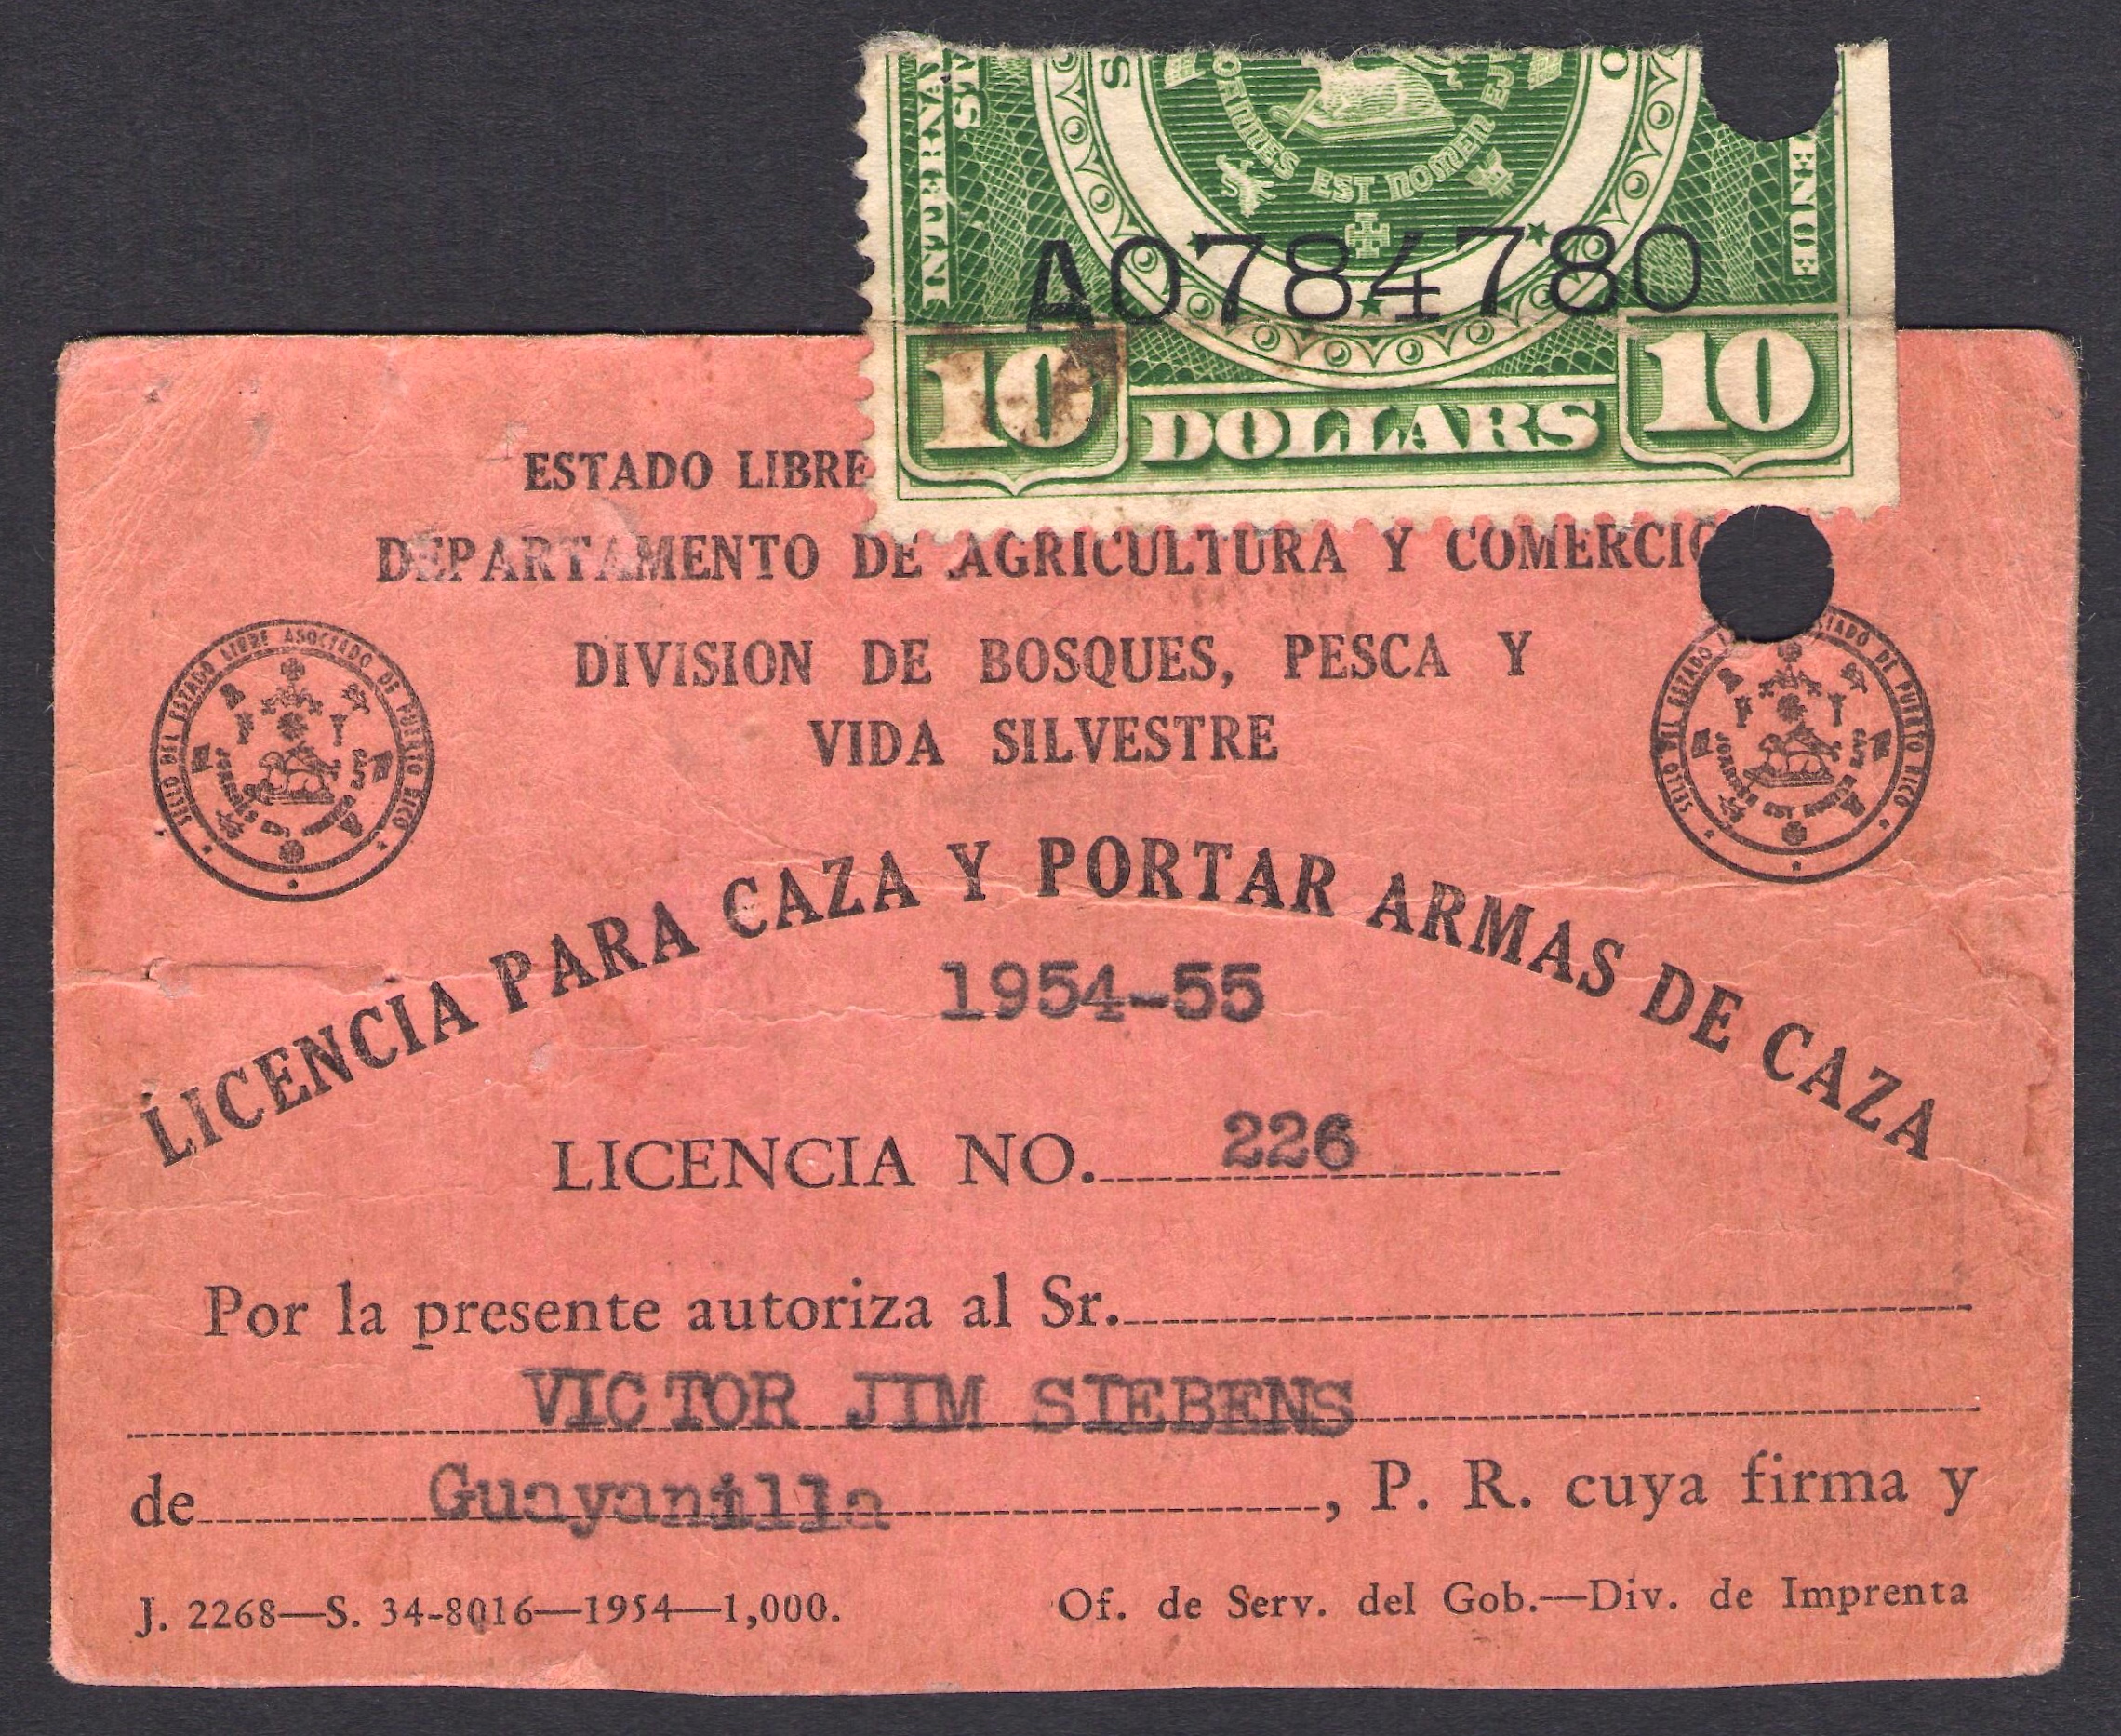 1954-55 Puerto Rico Hunting Permit with Internal Revenue Validating Stamp